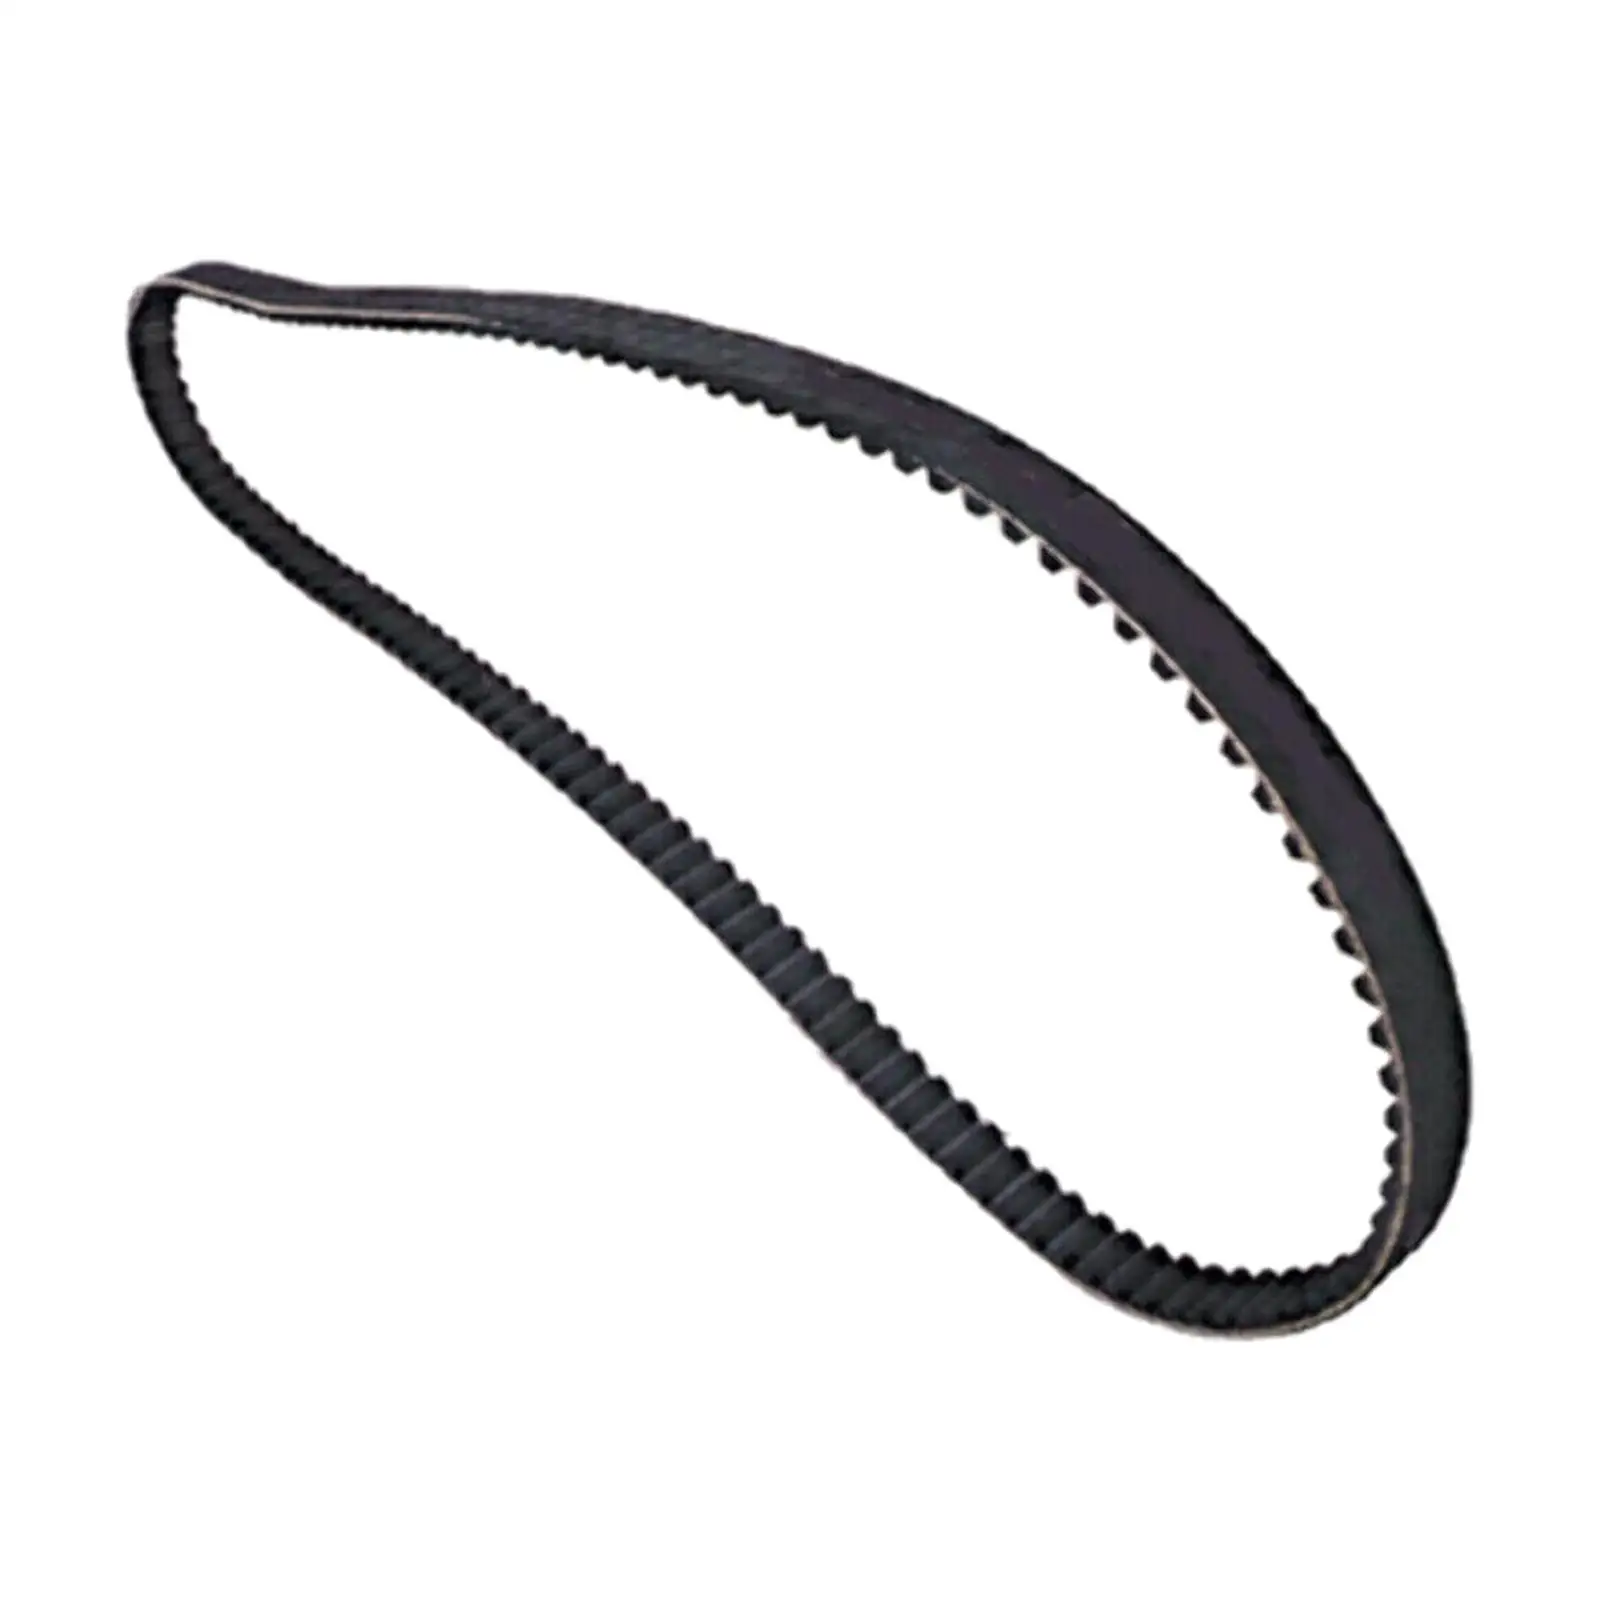 Rear Drive Belt 58-433 133 Tooth 1 1/8